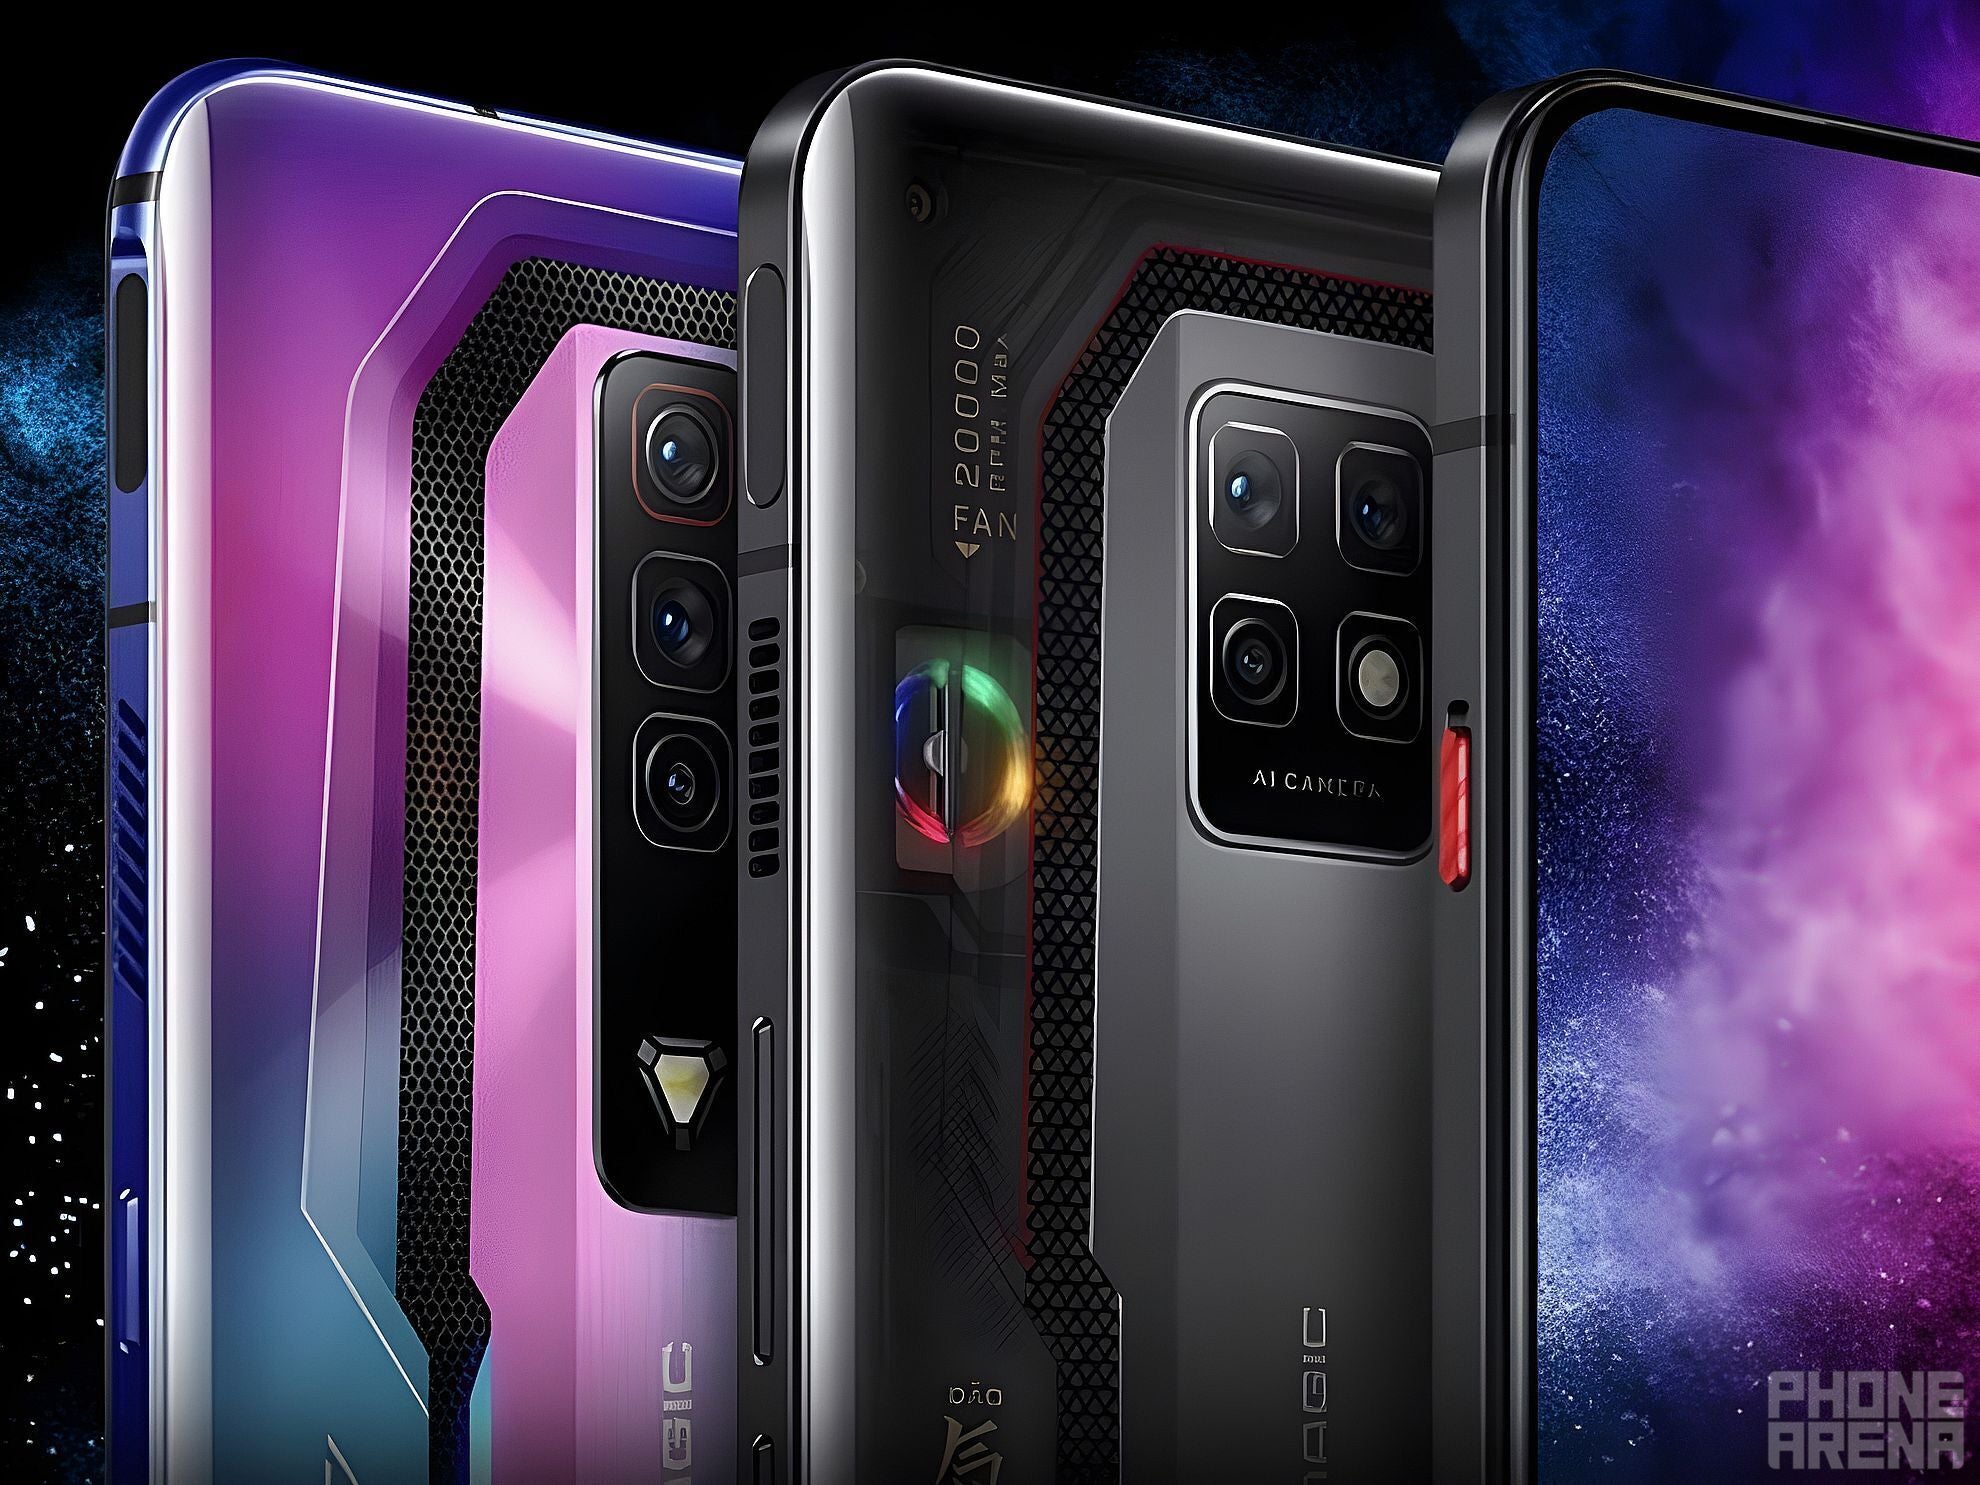 RedMagic 8 Pro getting revealed tomorrow, possibly as part of phone series  - PhoneArena